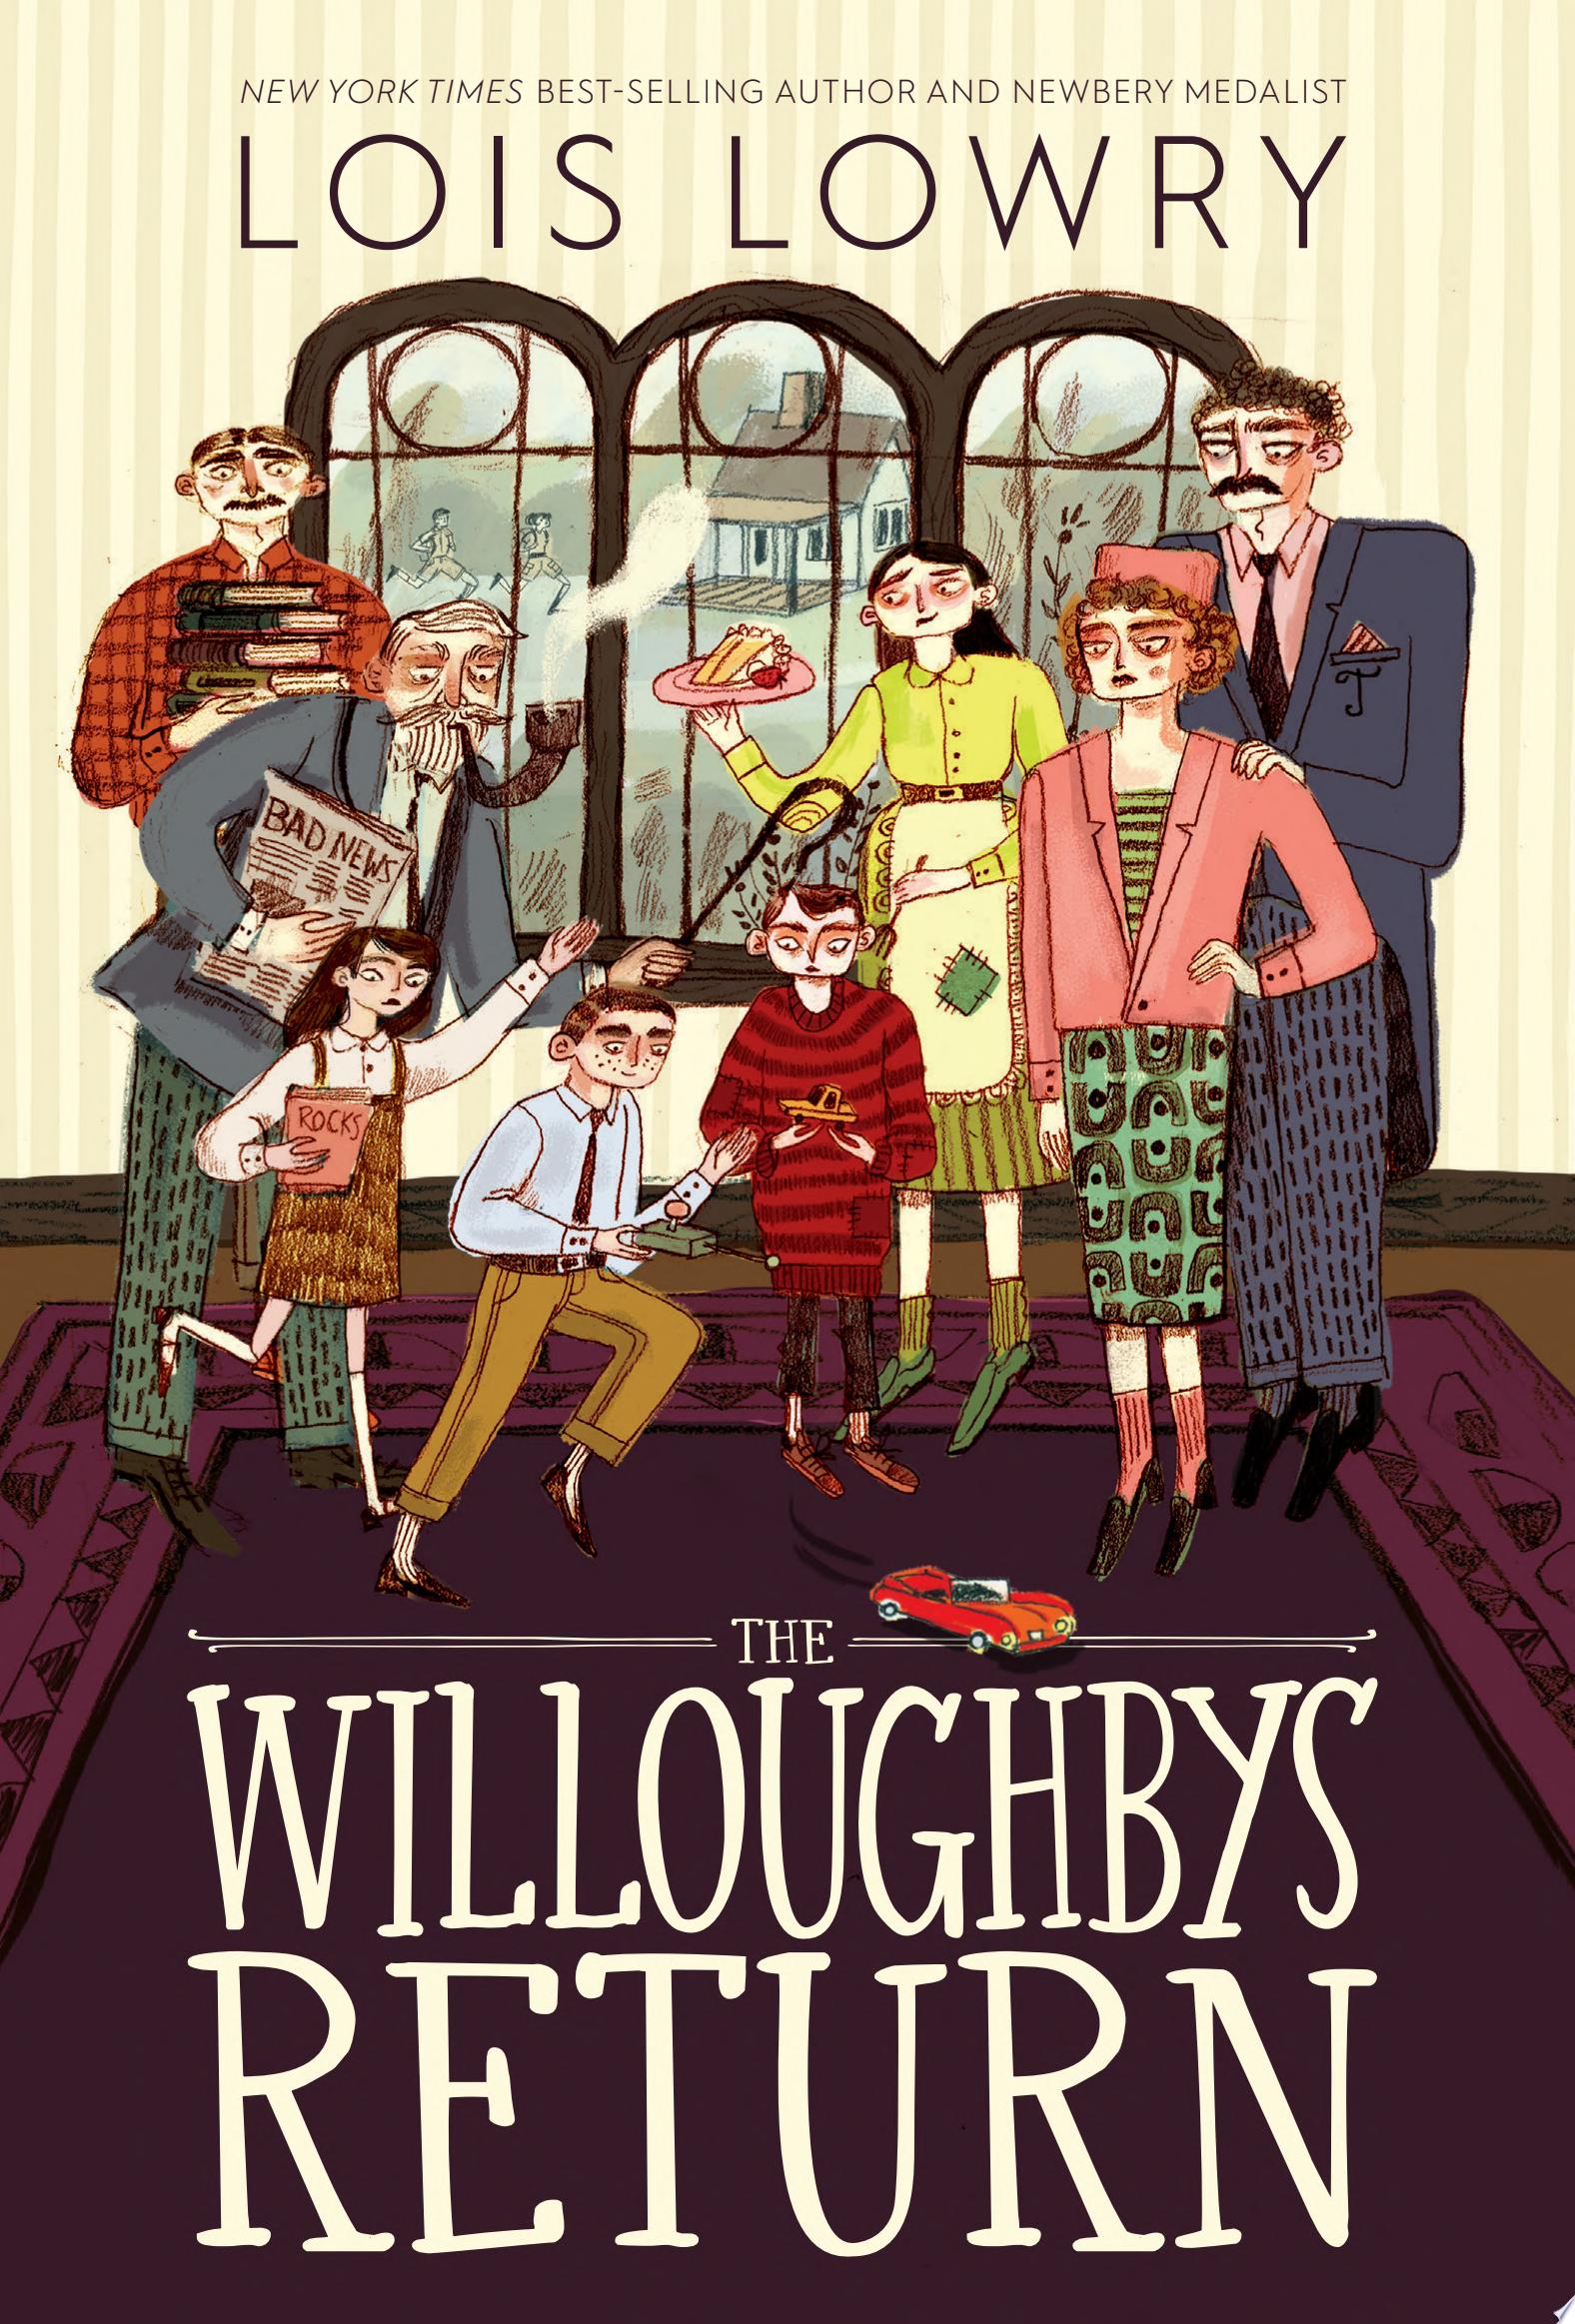 Image for "The Willoughbys Return"